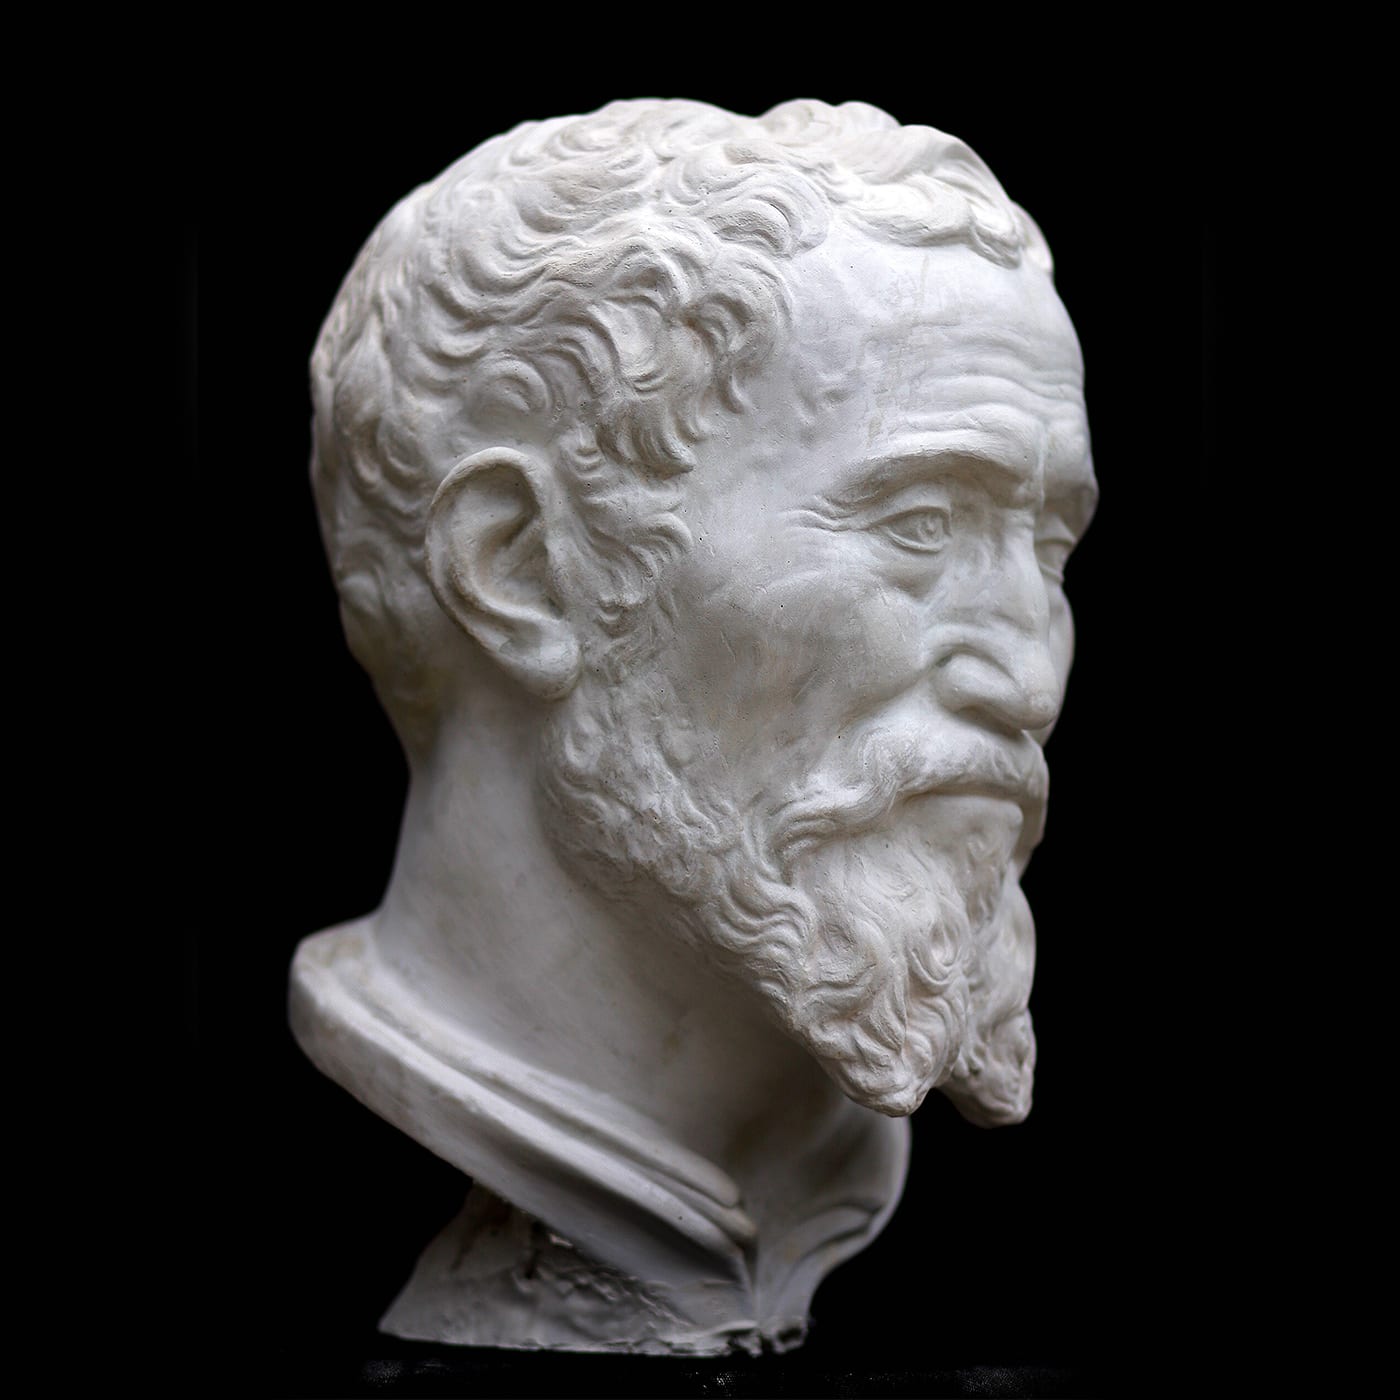 Cast of a bust of Michelangelo, Works of Art, RA Collection